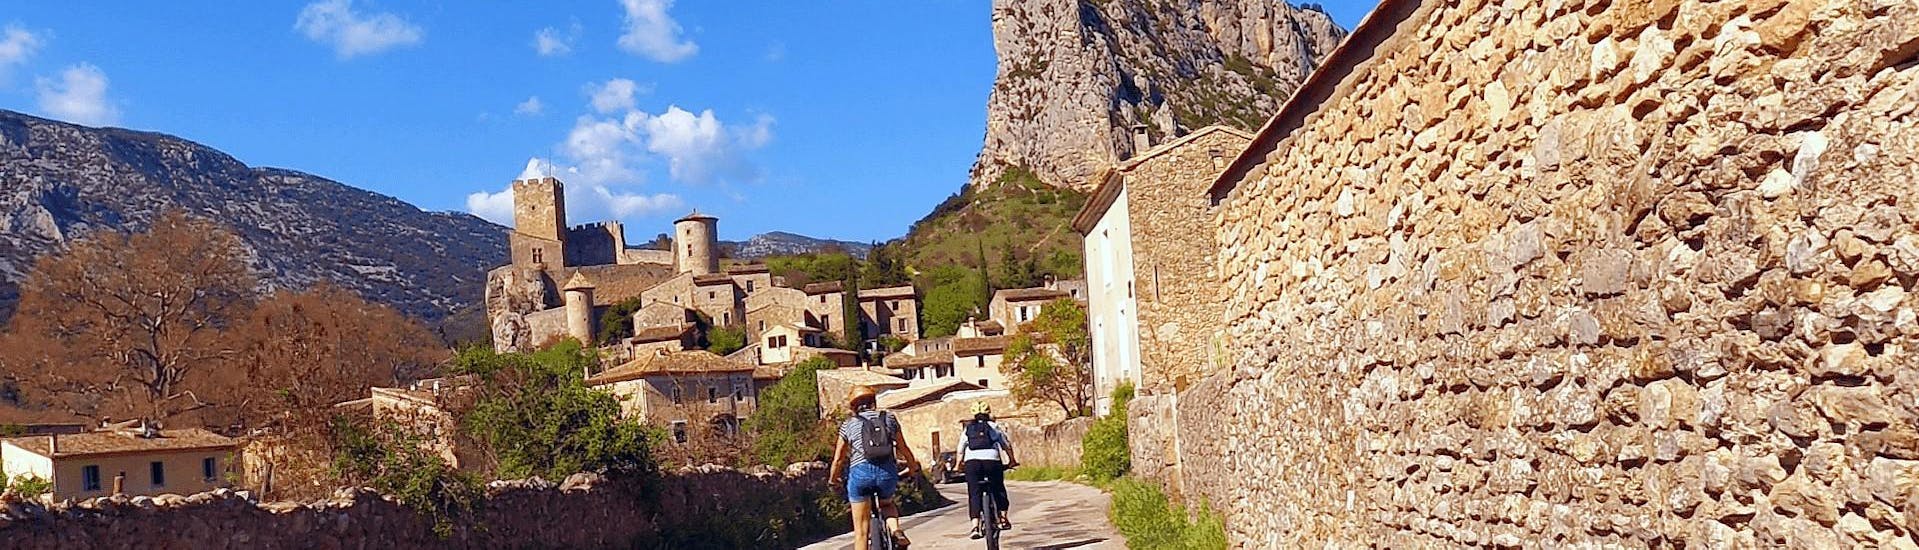 Two tourists are coming back to the village Saint-Jean-de-Buèges thanks to the E-Mountain Bike Rental in Saint-Jean-de-Buèges of Le Garrel Hérault.